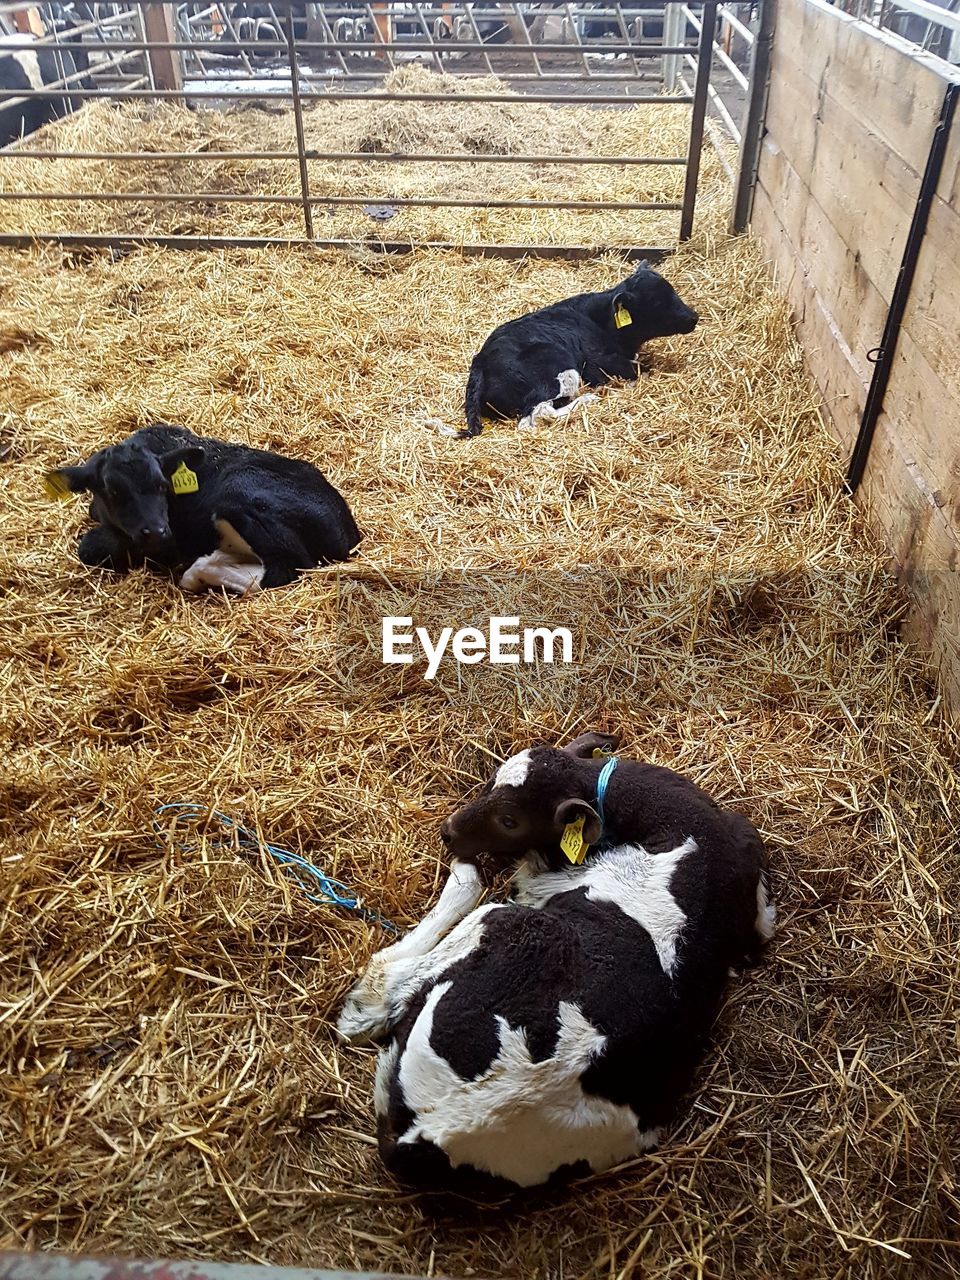 Cows lying in stall